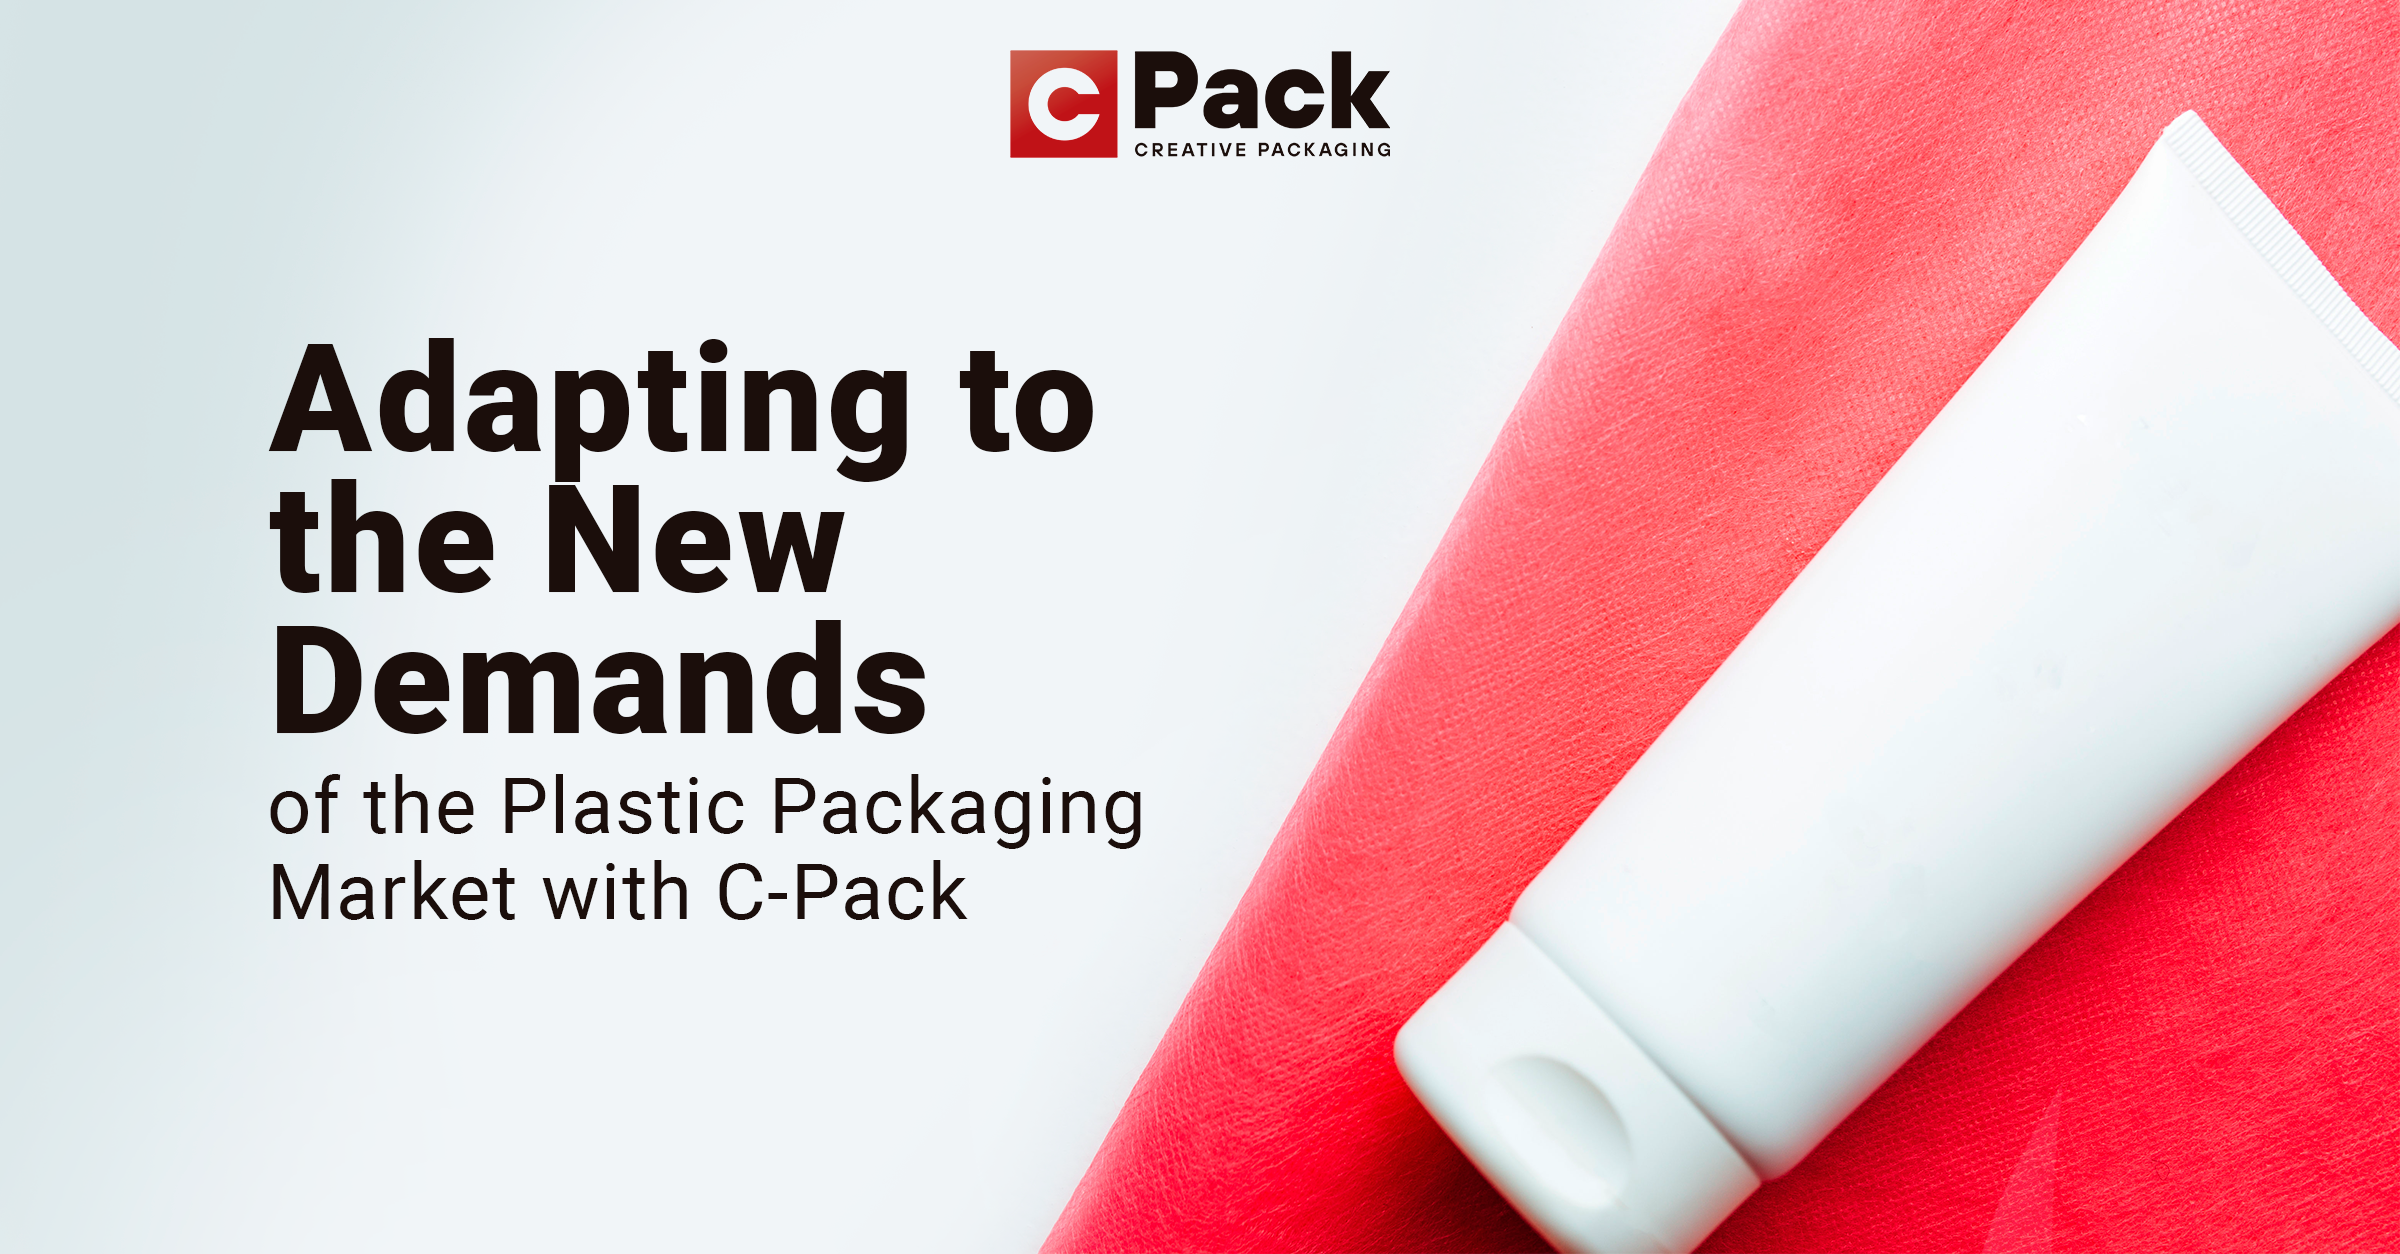 Image highlighting C-Pack's ability to adapt to the new demands of the plastic packaging market.